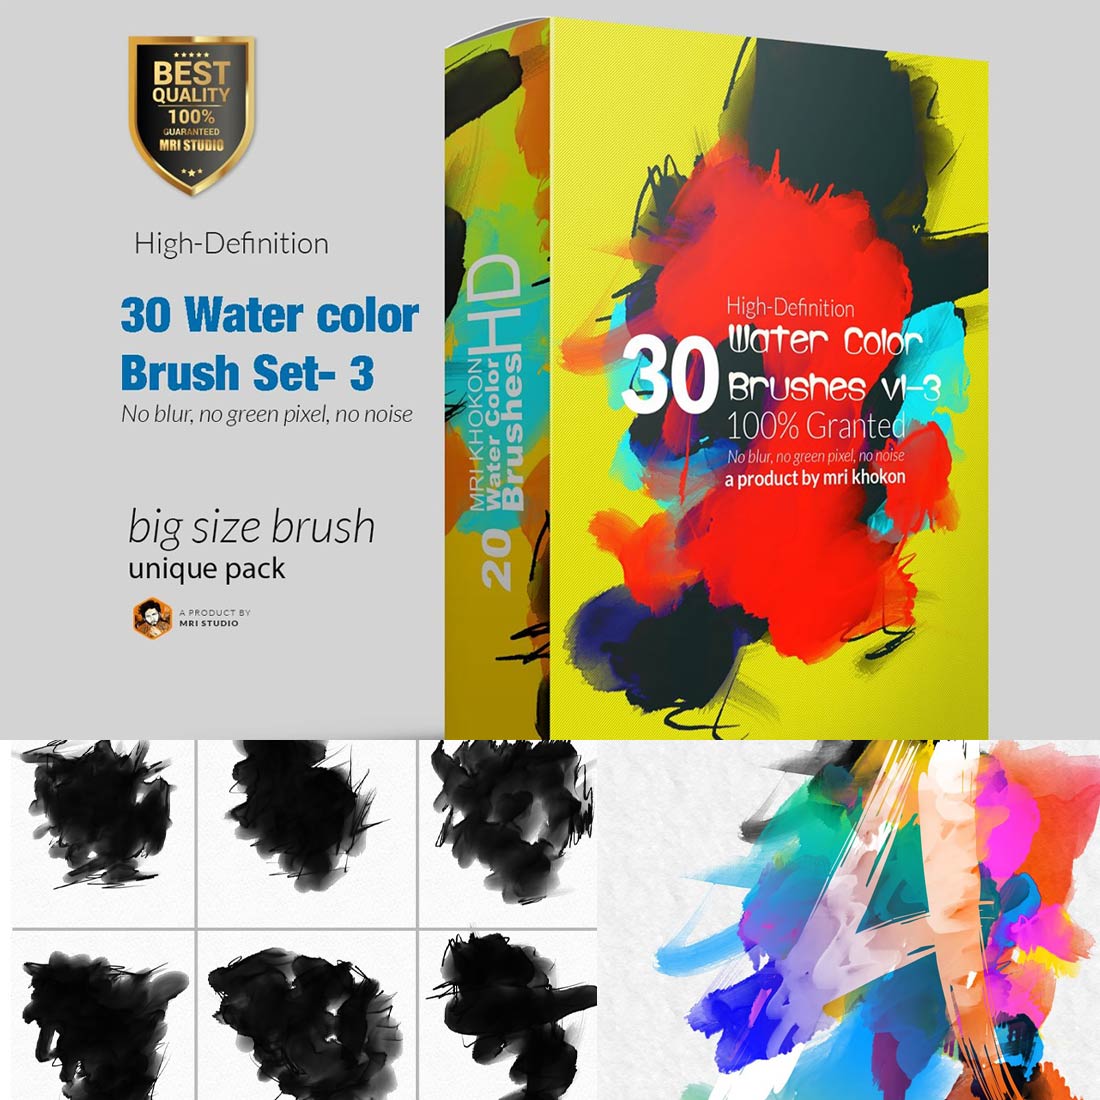 Hi-Res Water color PS Brush Set-3 cover image.